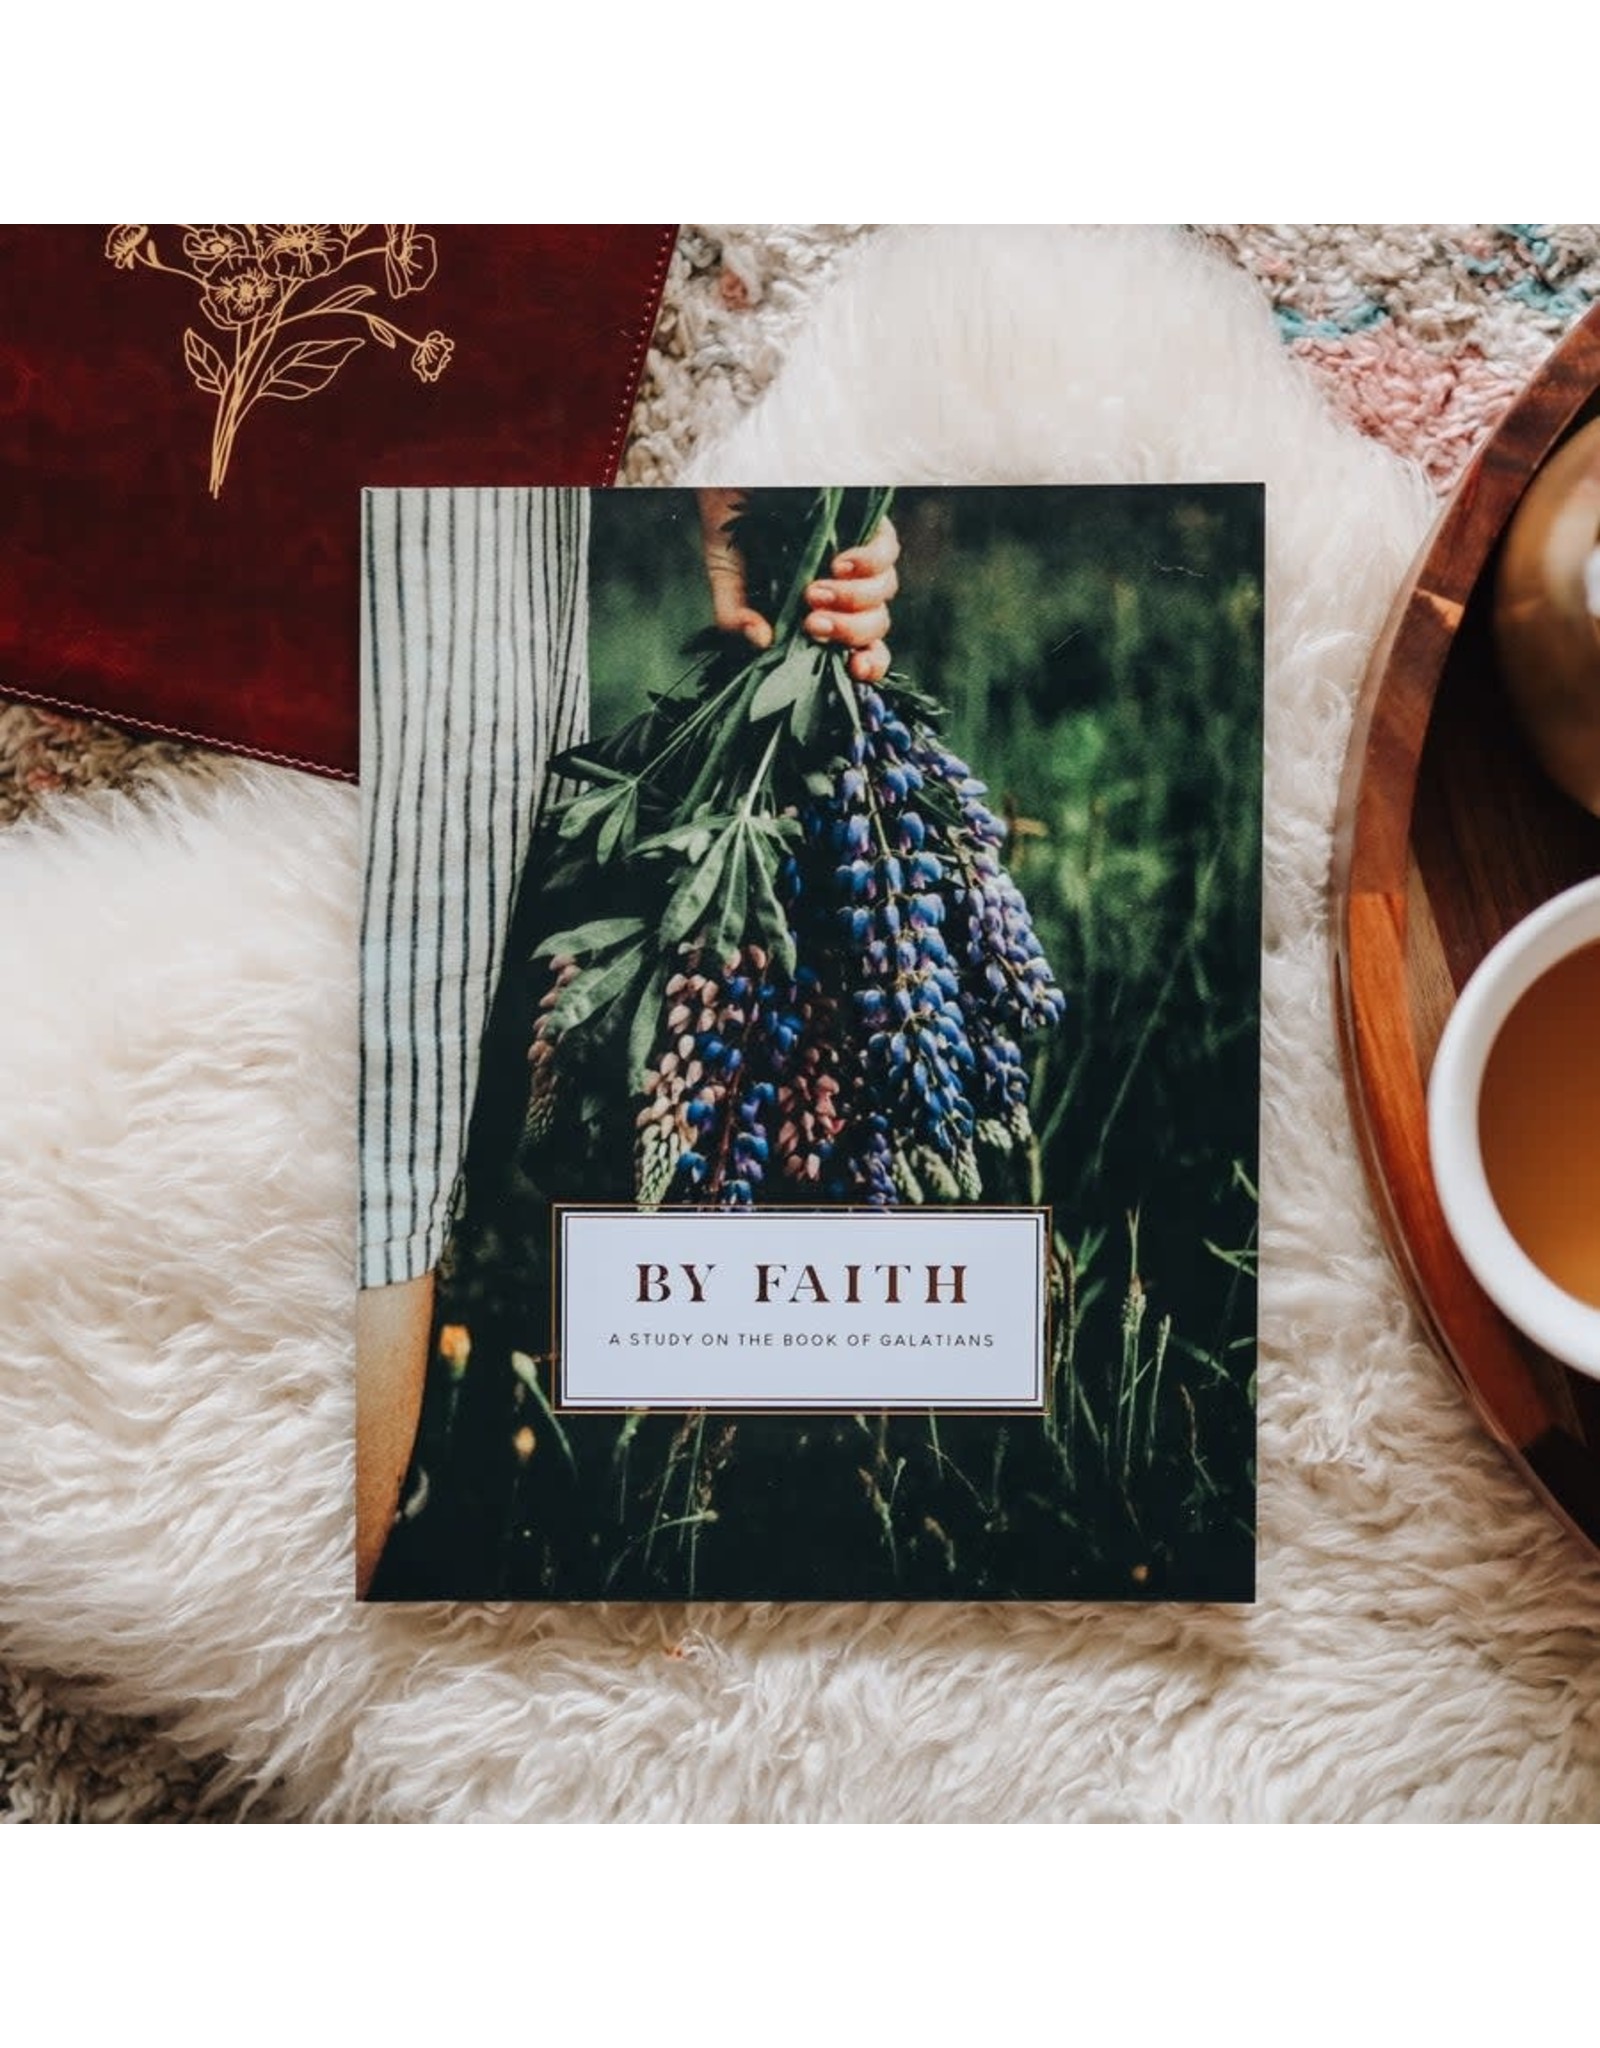 The Daily Grace Co. Book of Galatians "By Faith" Study for Women